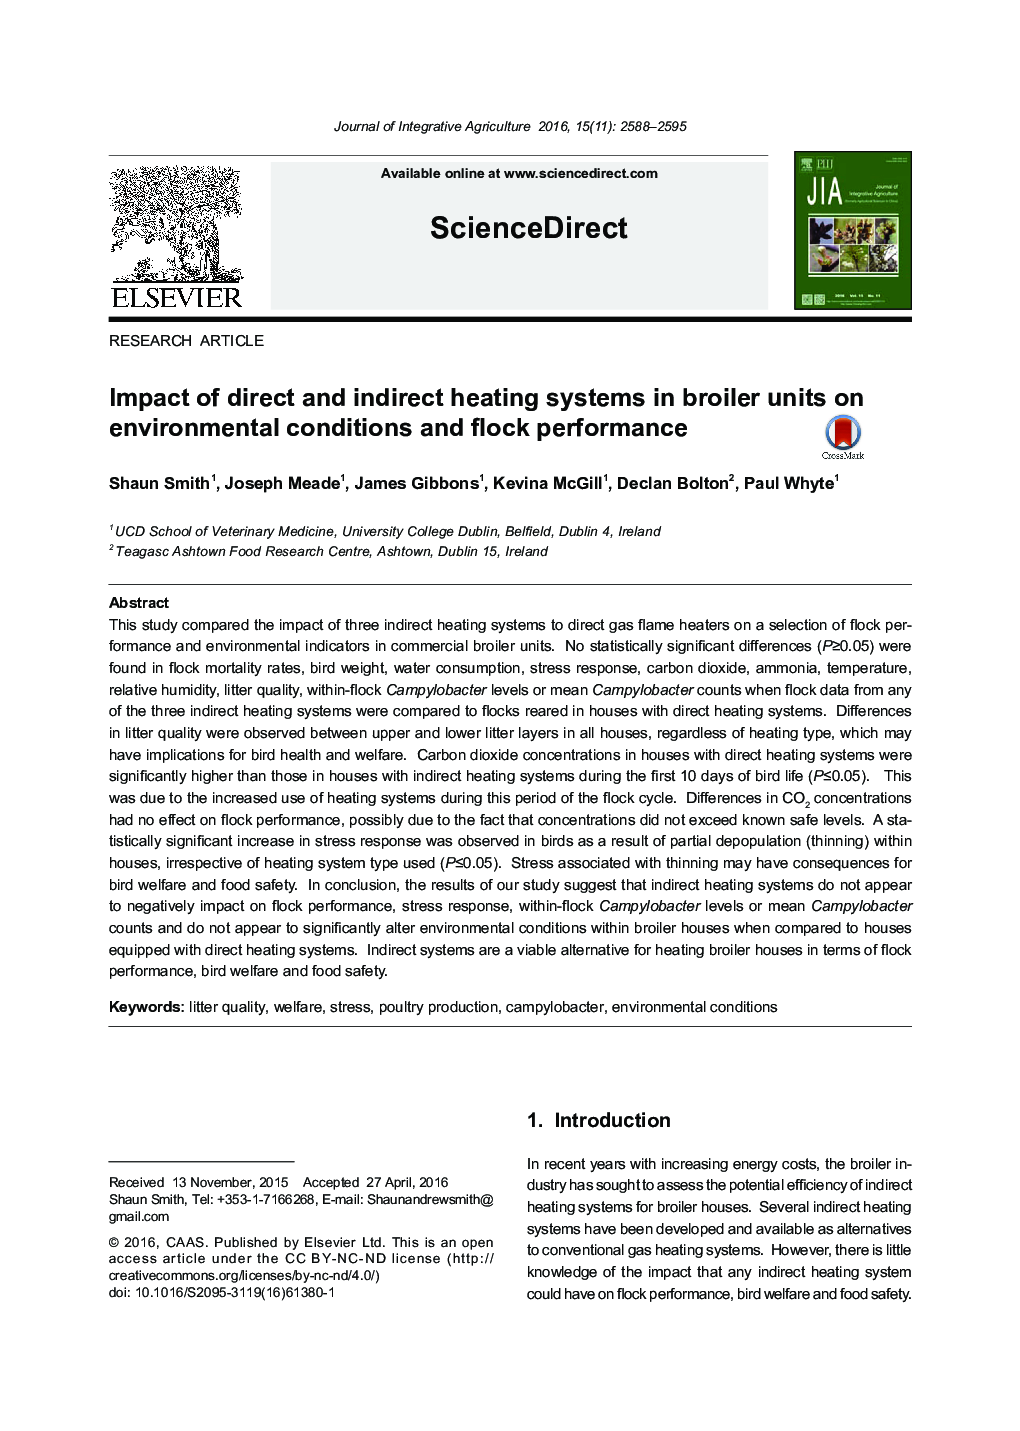 Impact of direct and indirect heating systems in broiler units on environmental conditions and flock performance